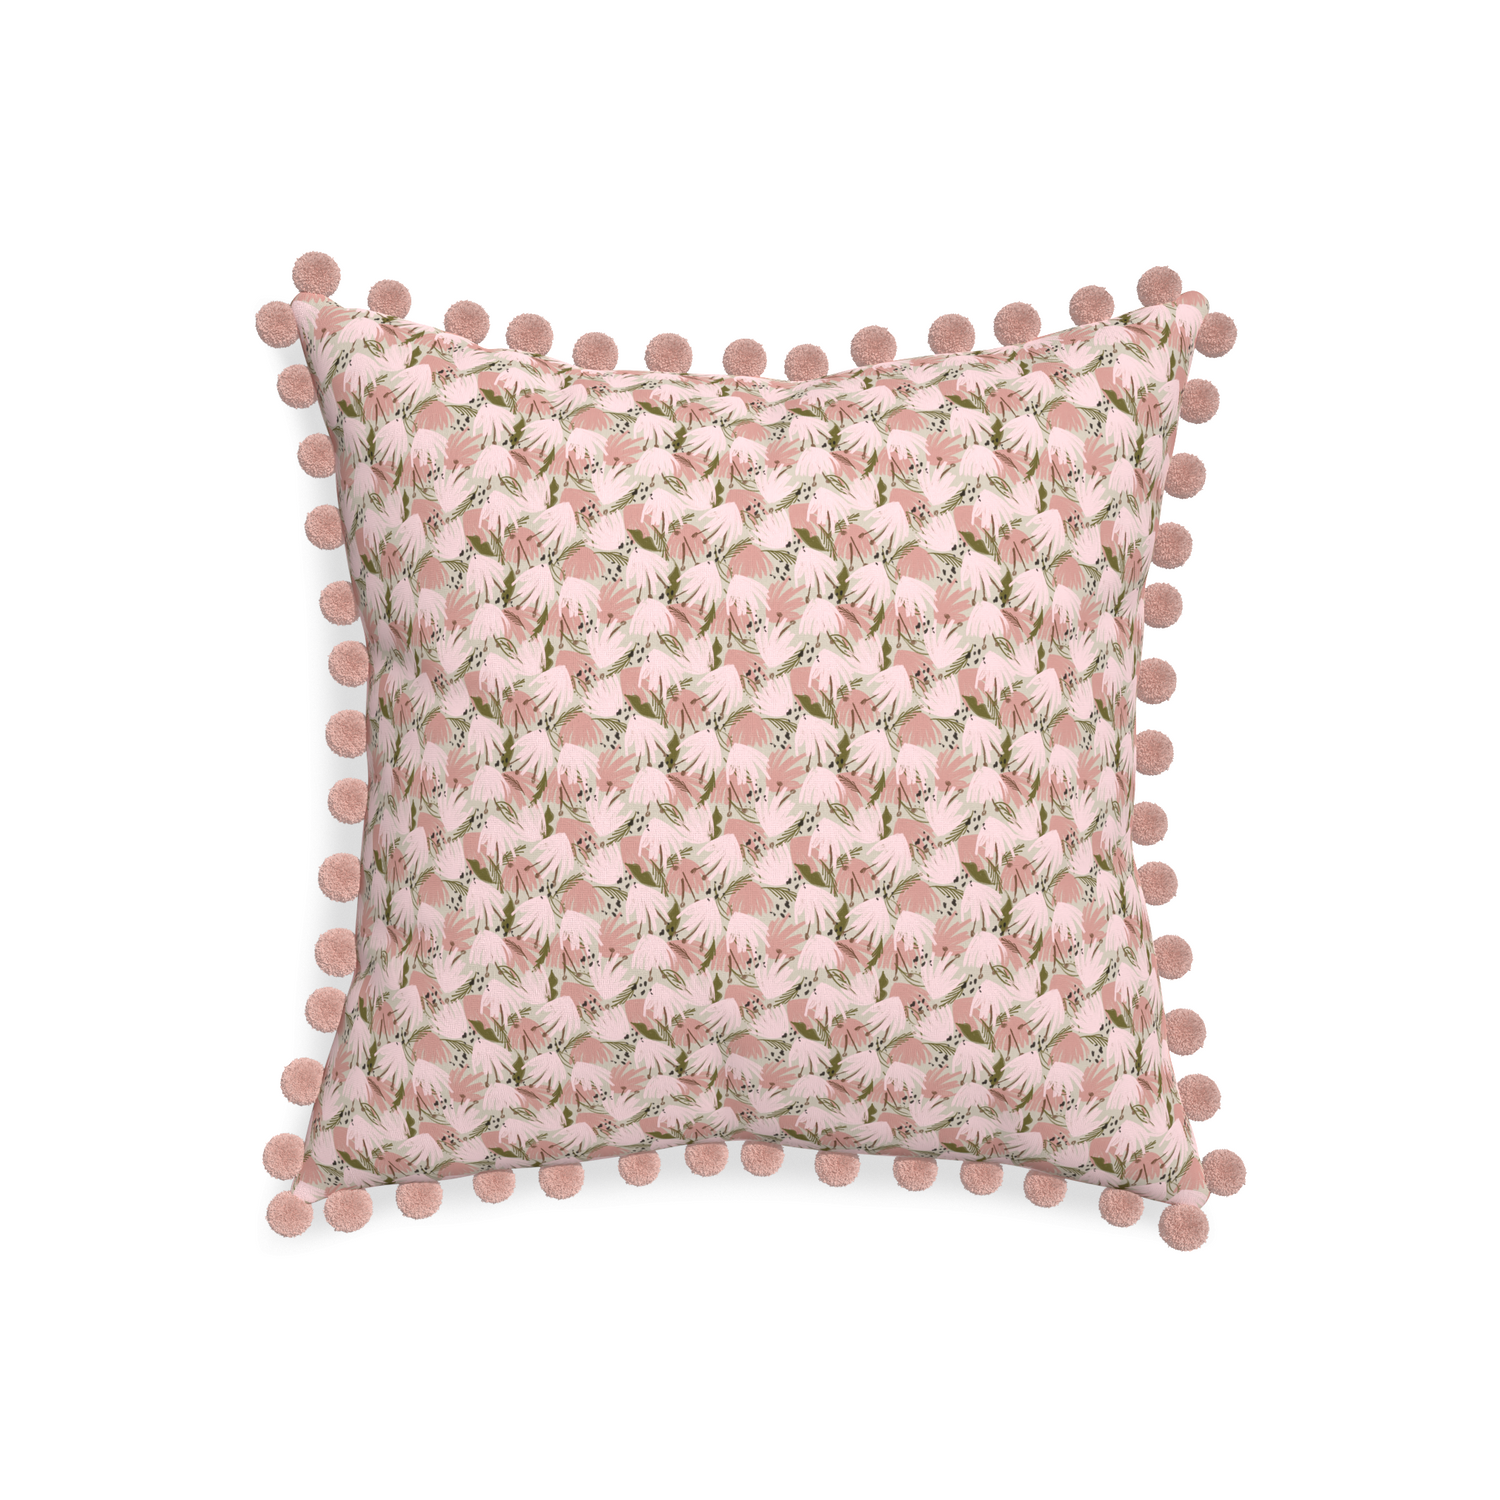 20-square eden pink custom pink floralpillow with rose pom pom on white background